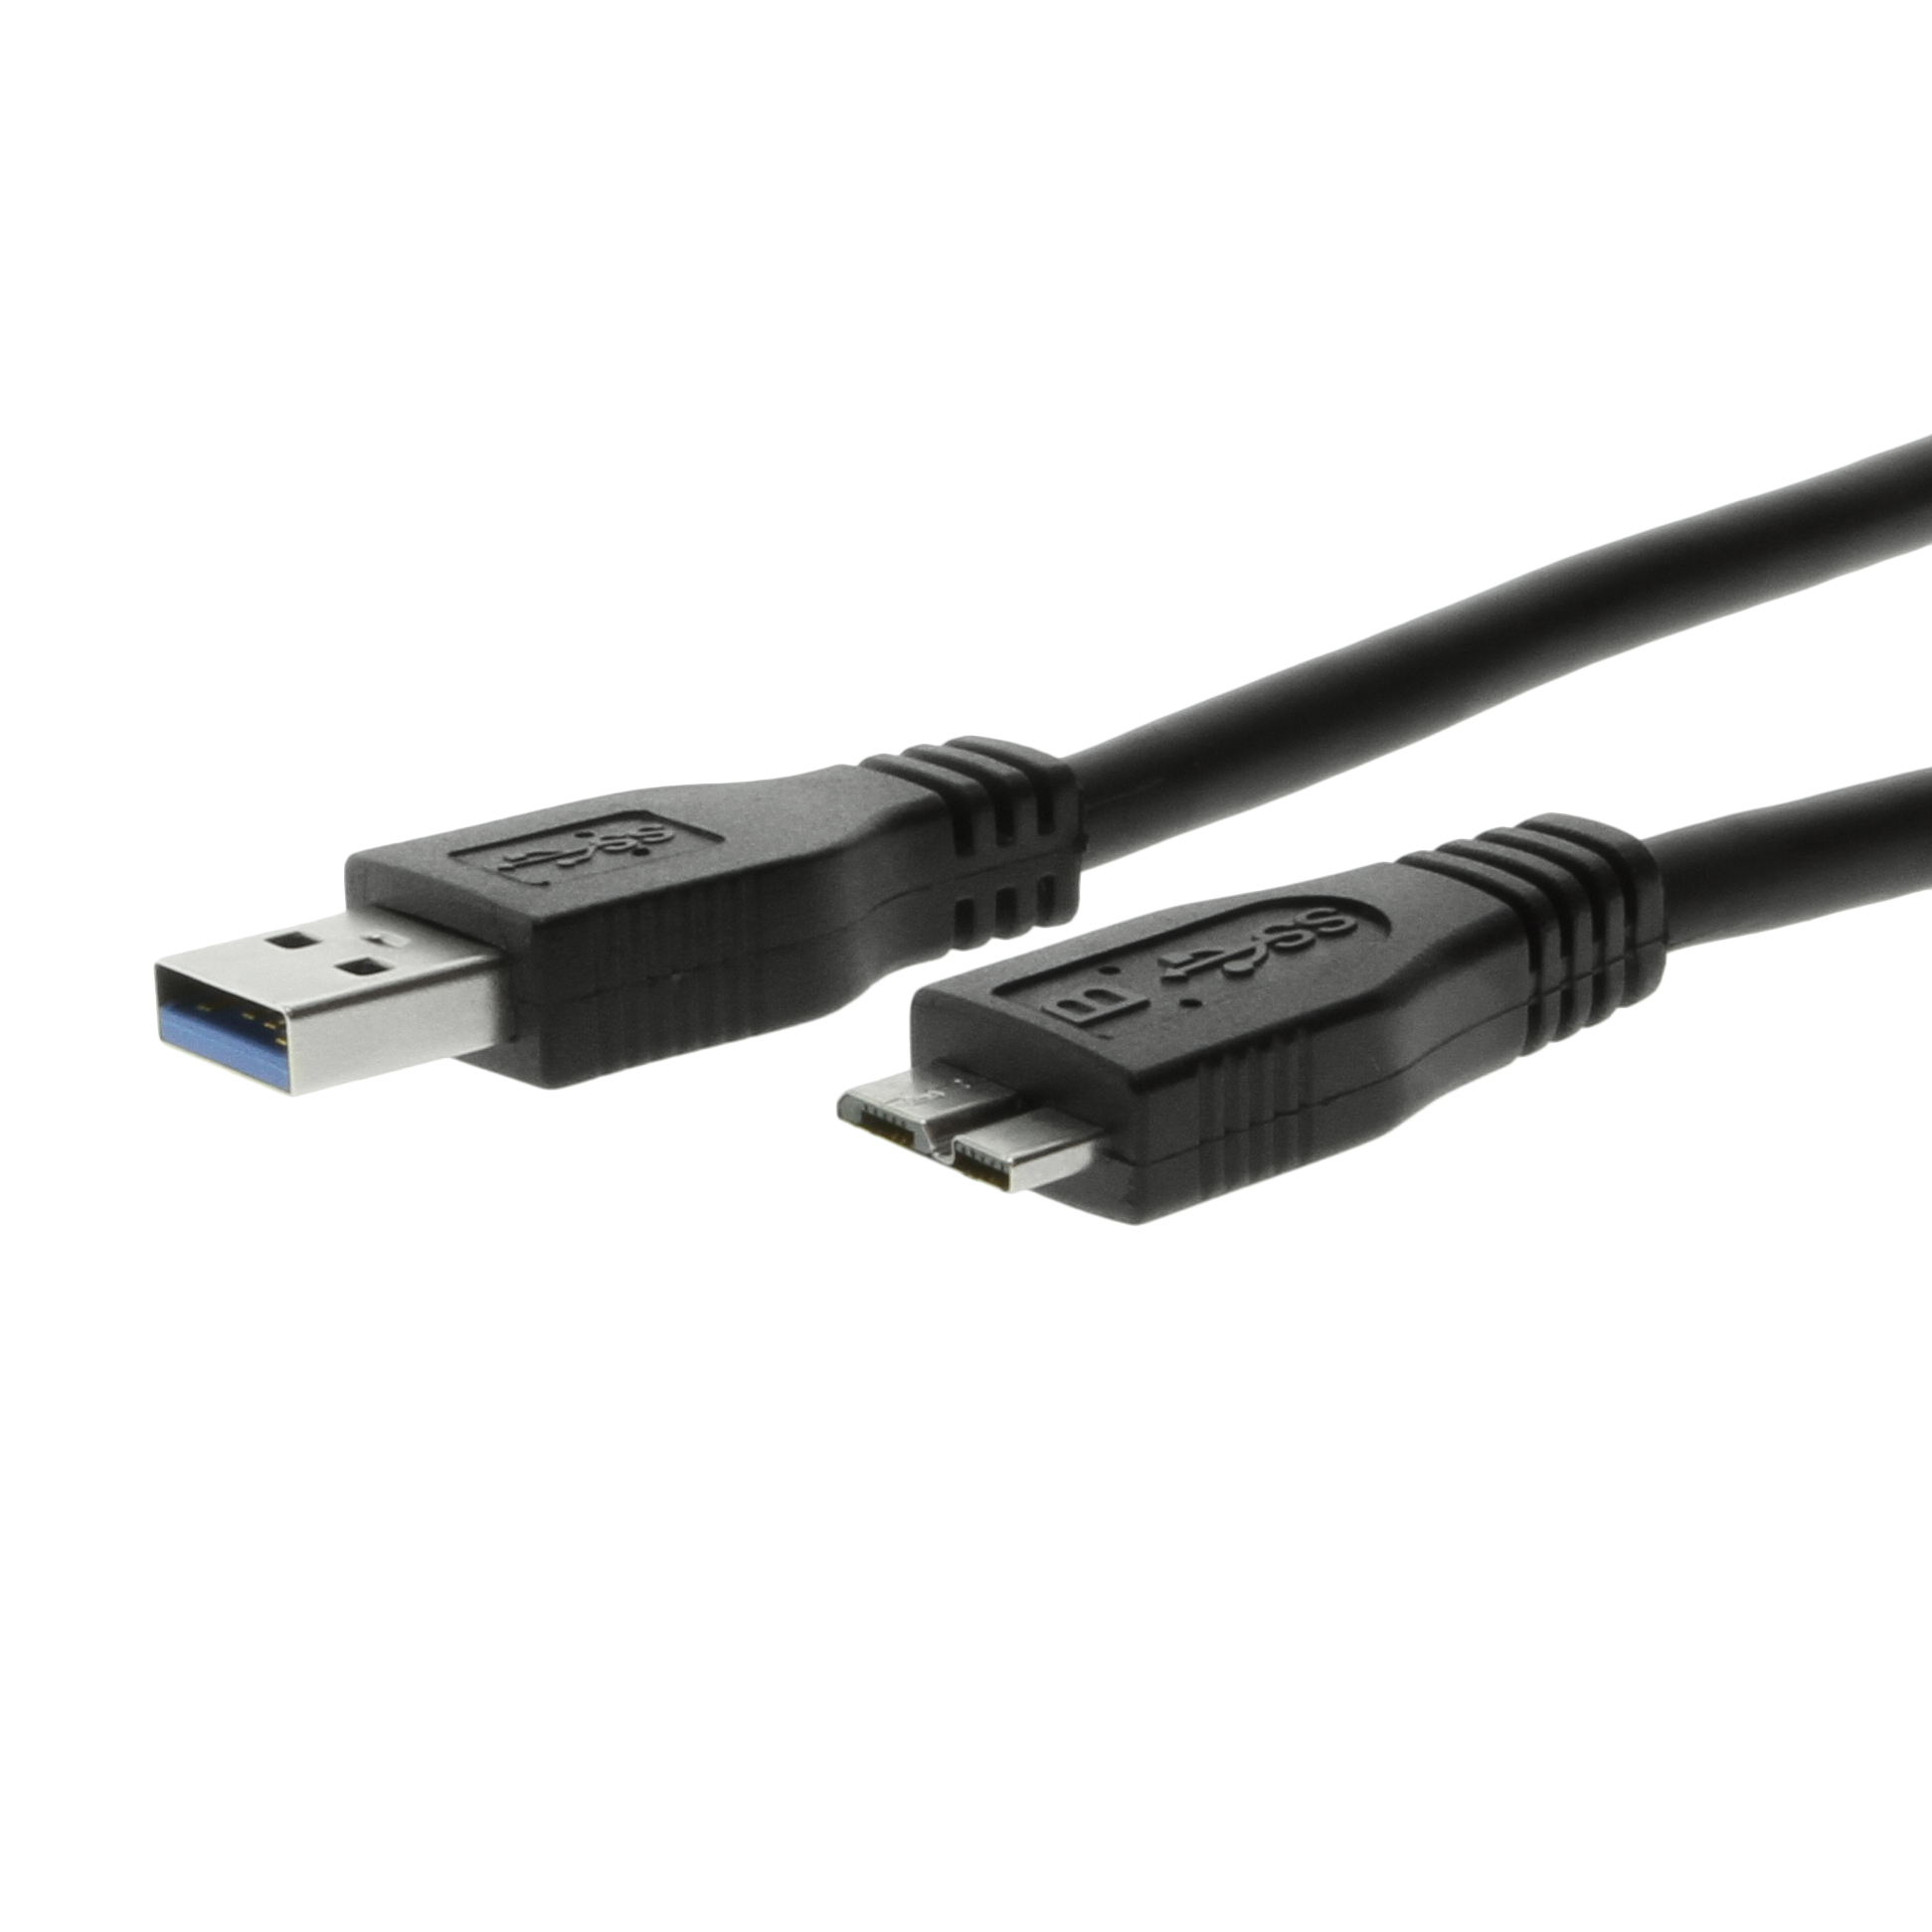 Forskellige magnet auditorium 1ft. USB 3.0 5Gbps Type A Male to Micro-B Male Super Speed Cable